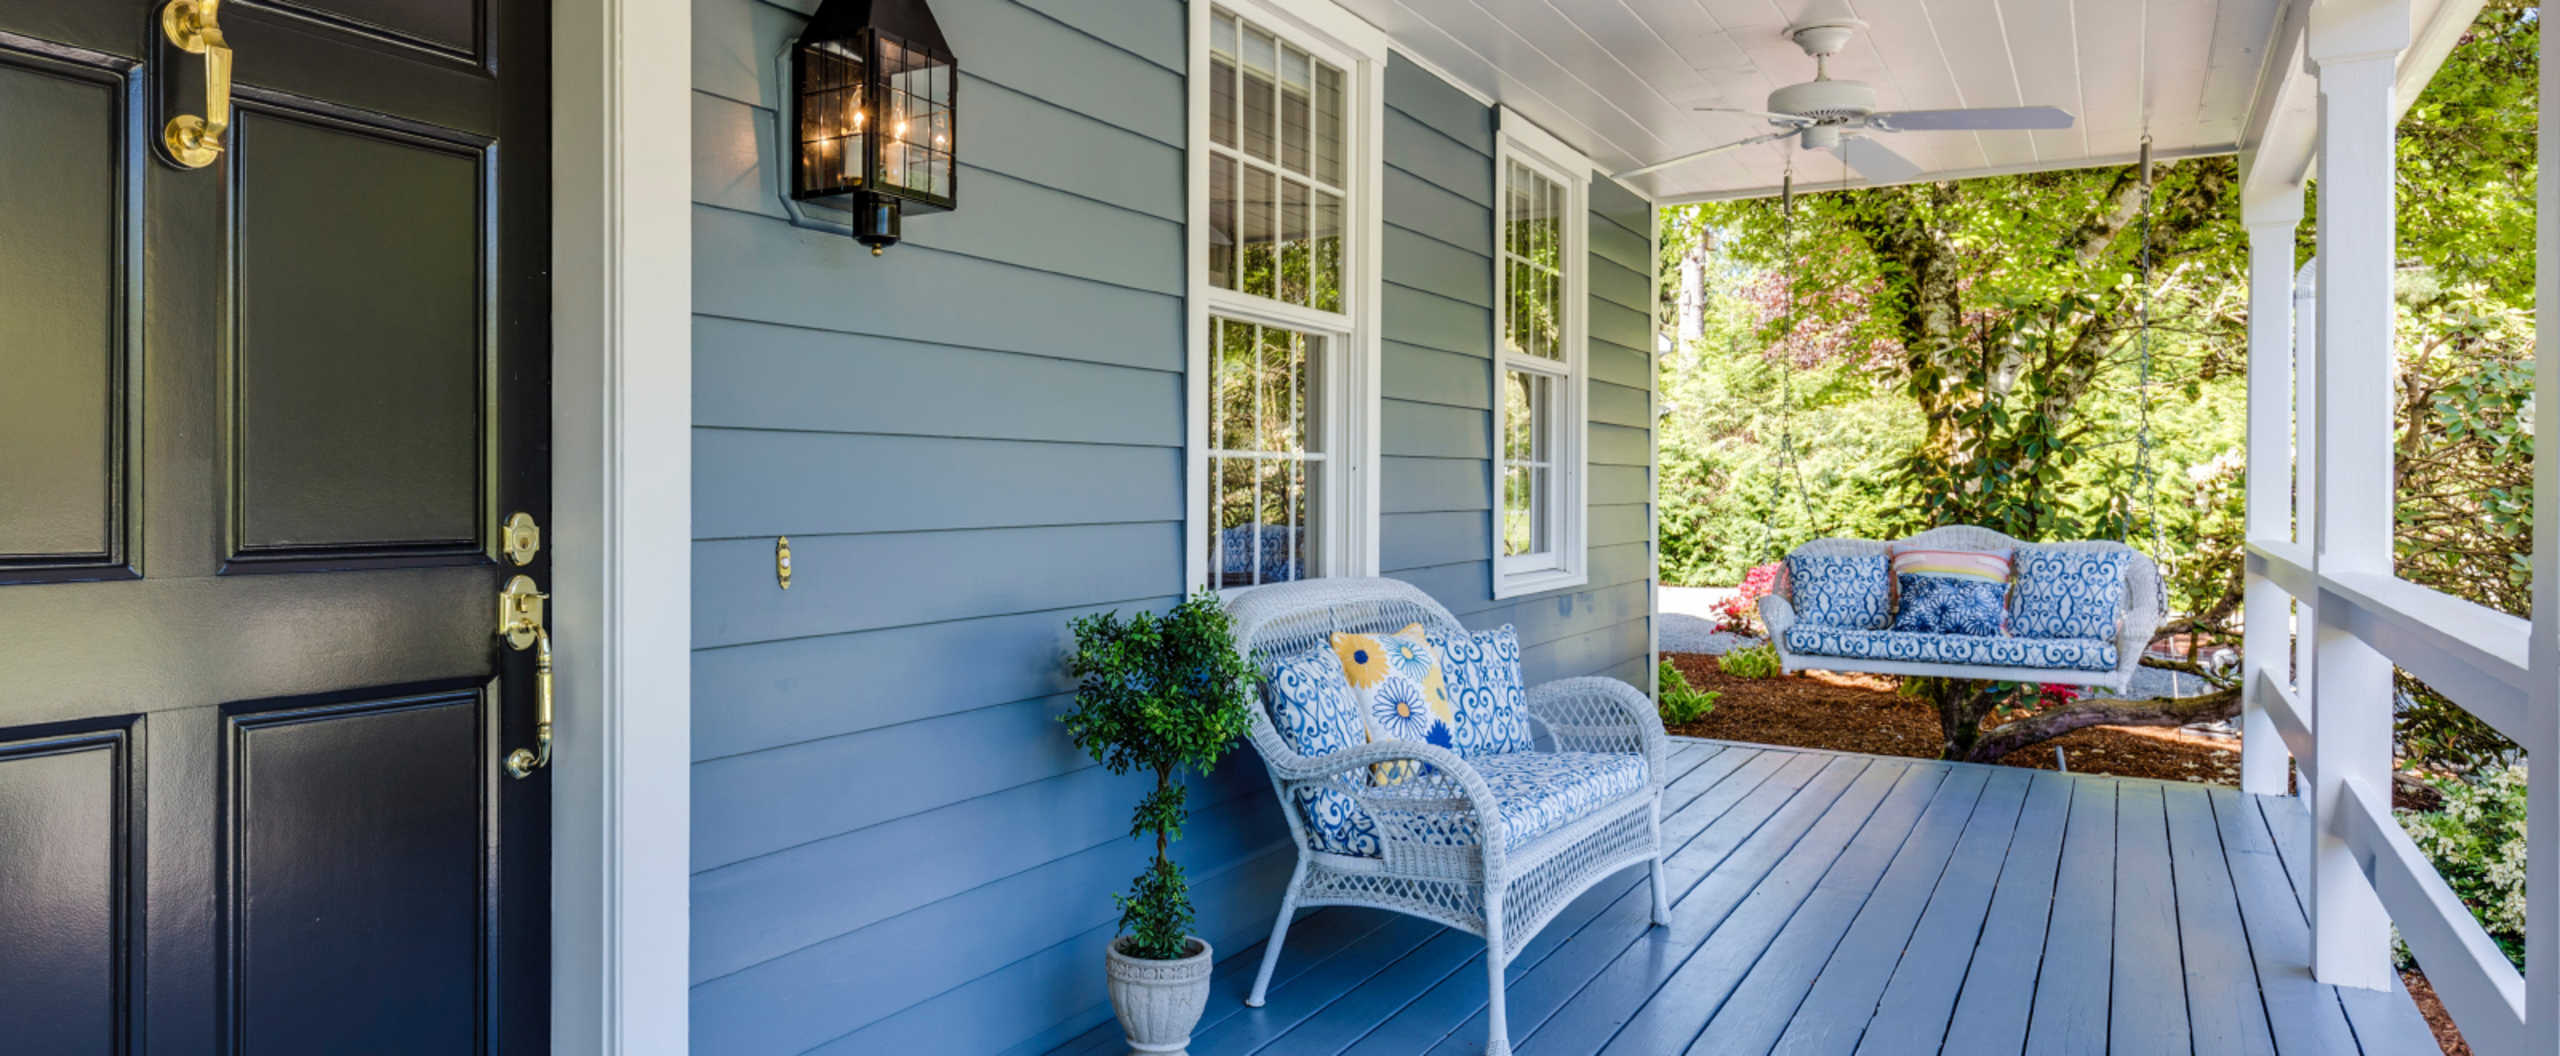 Enjoy beauitful nights relaxing on this front porch